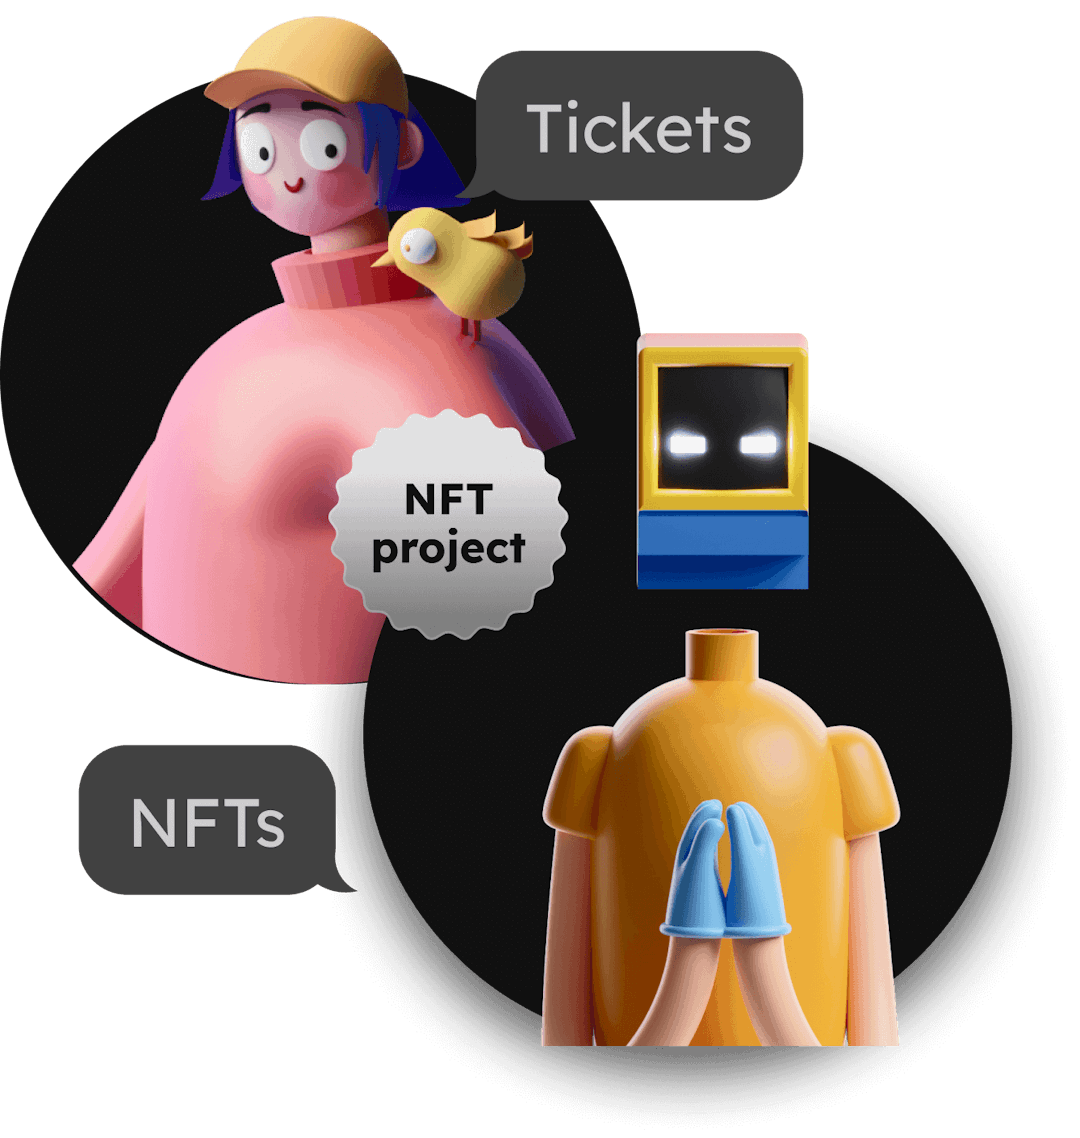 Tickets as Non-Fungible Tokens (NFT)